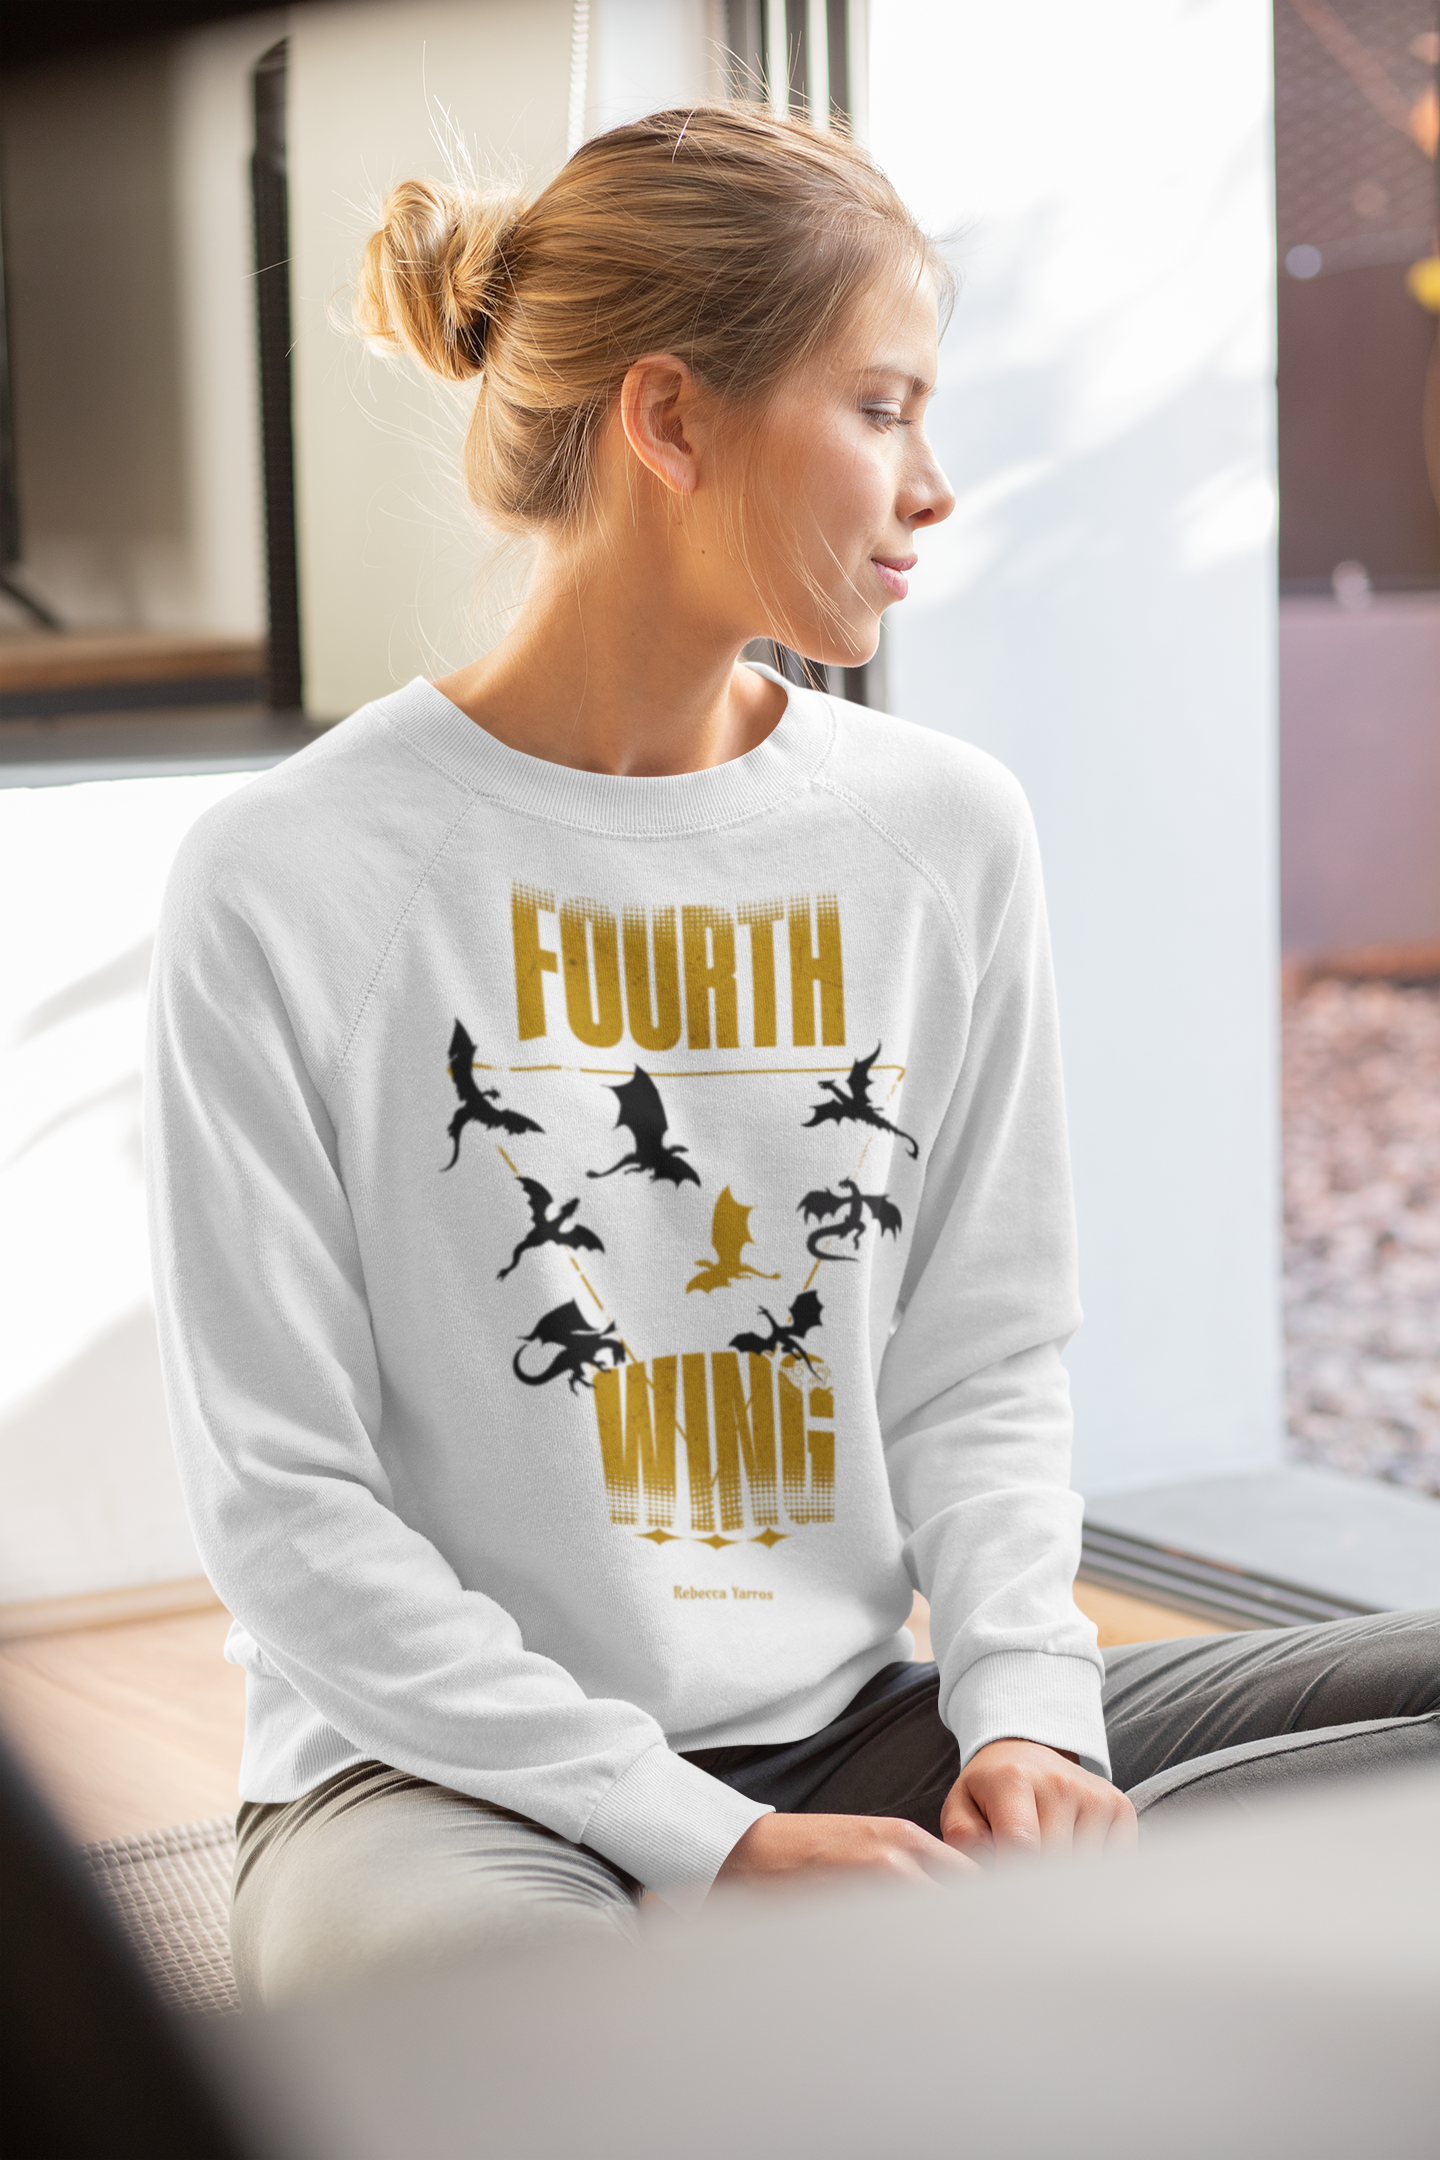 Fourth Wing Sweatshirt - Officially Licensed Fourth Wing by Rebecca Yarros Merchandise